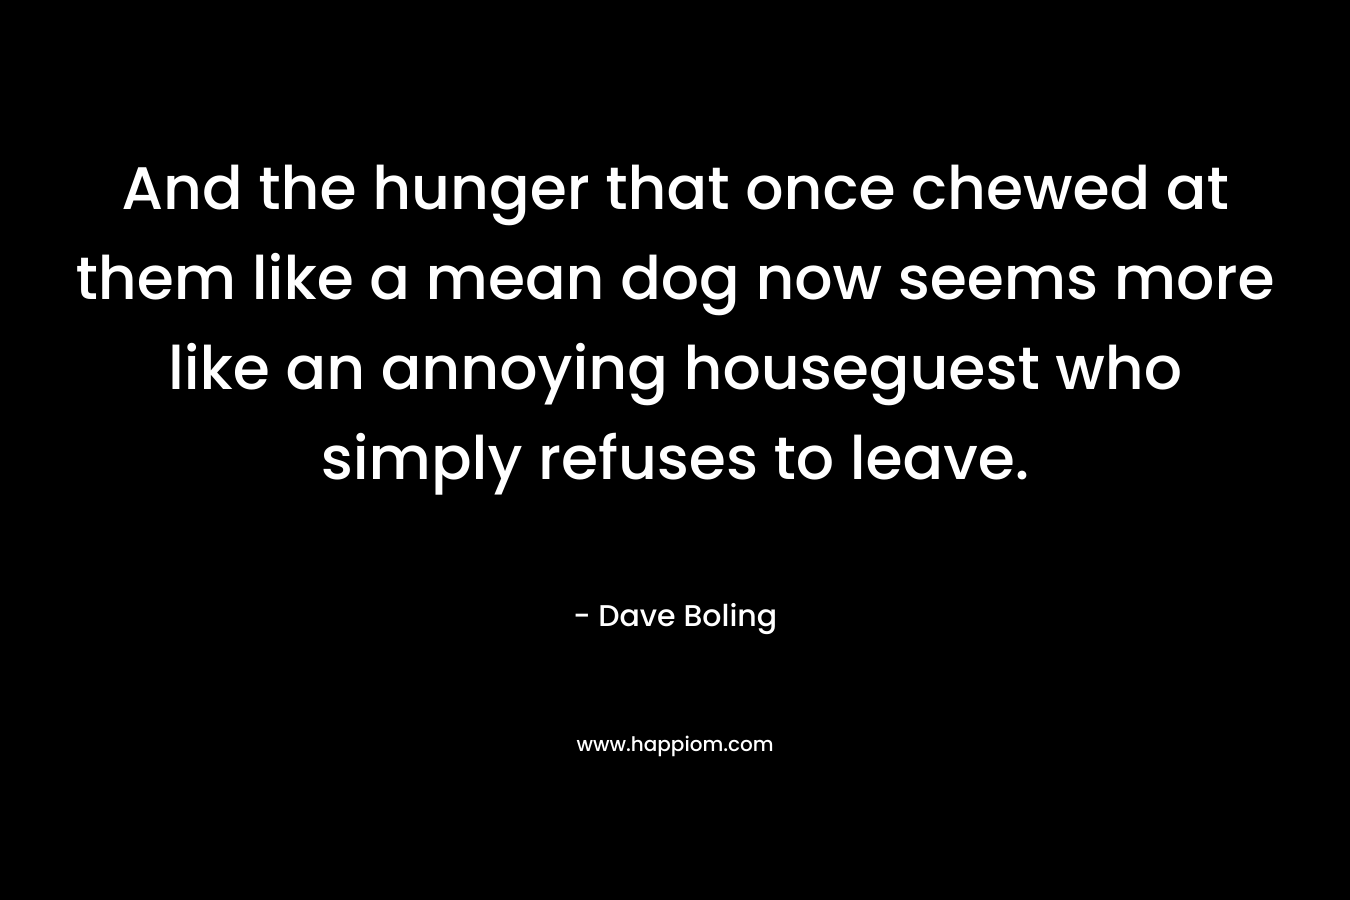 And the hunger that once chewed at them like a mean dog now seems more like an annoying houseguest who simply refuses to leave.